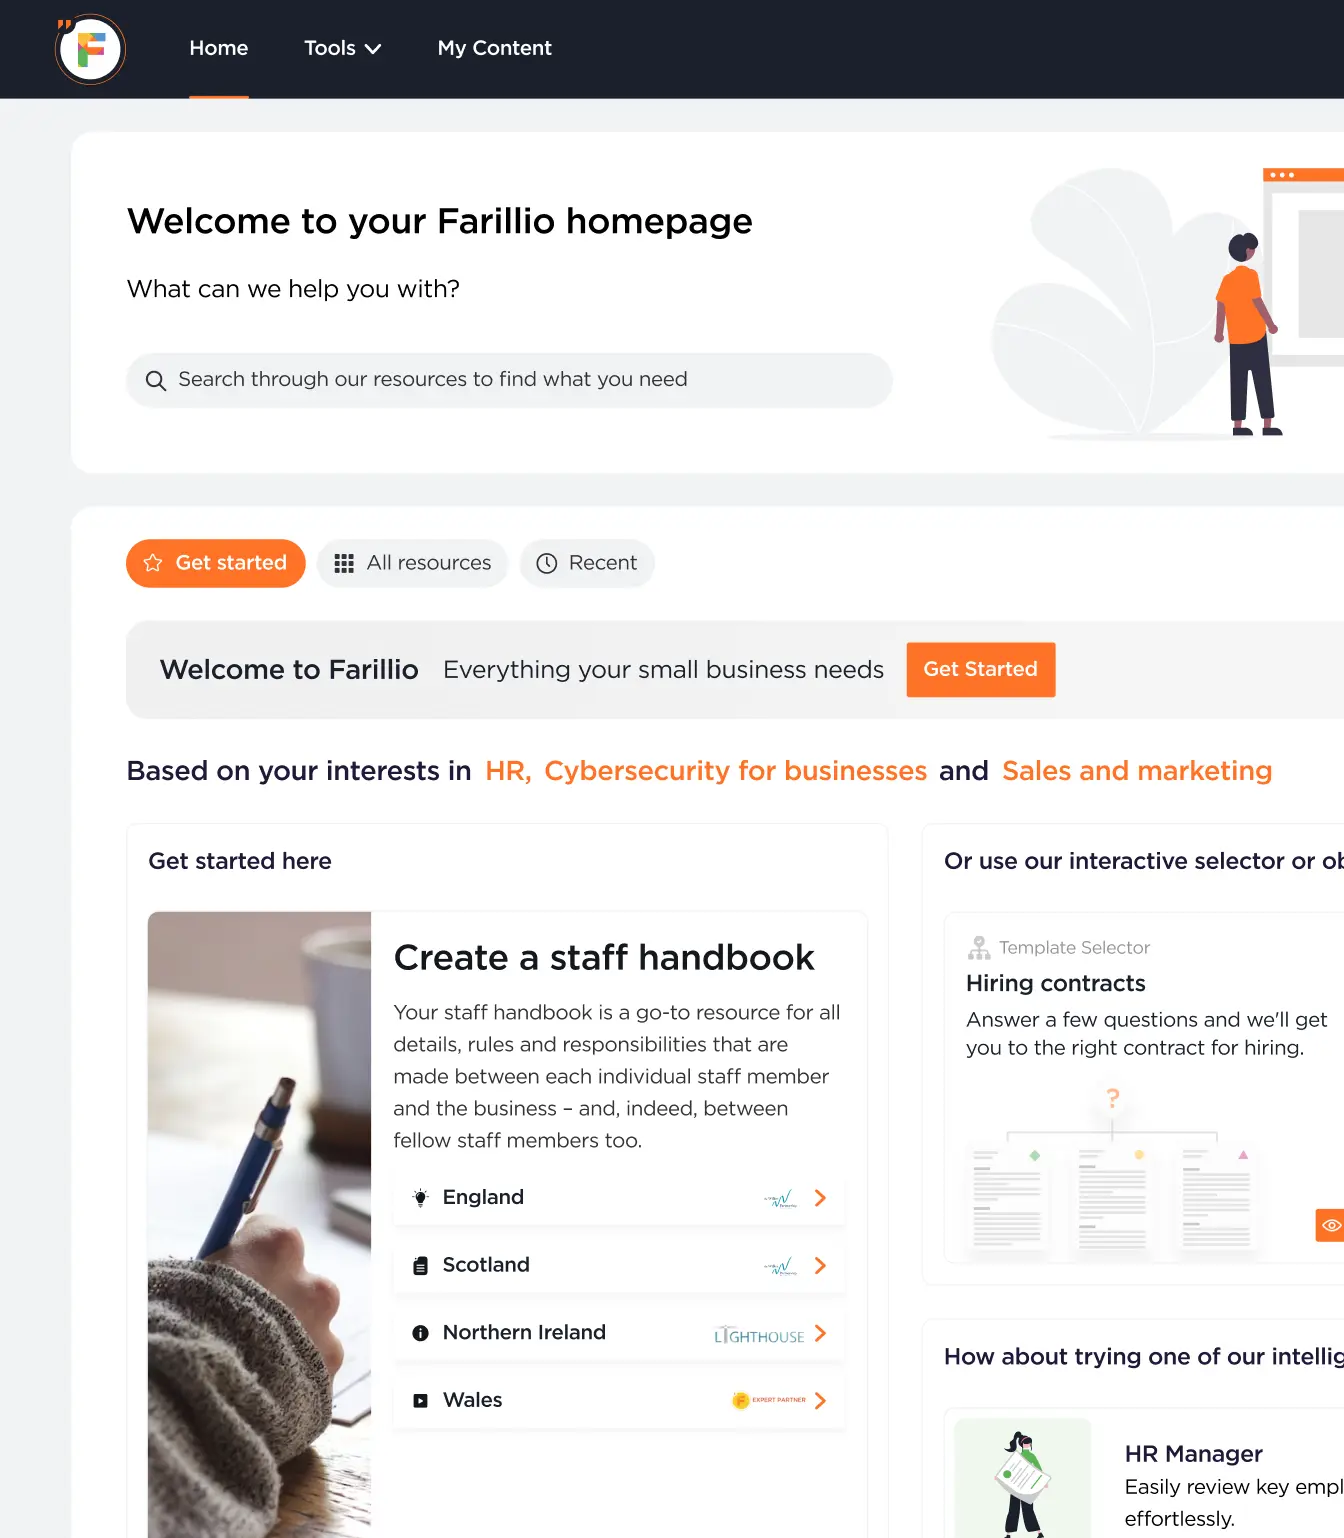 Dashboard page from the Farillio platform